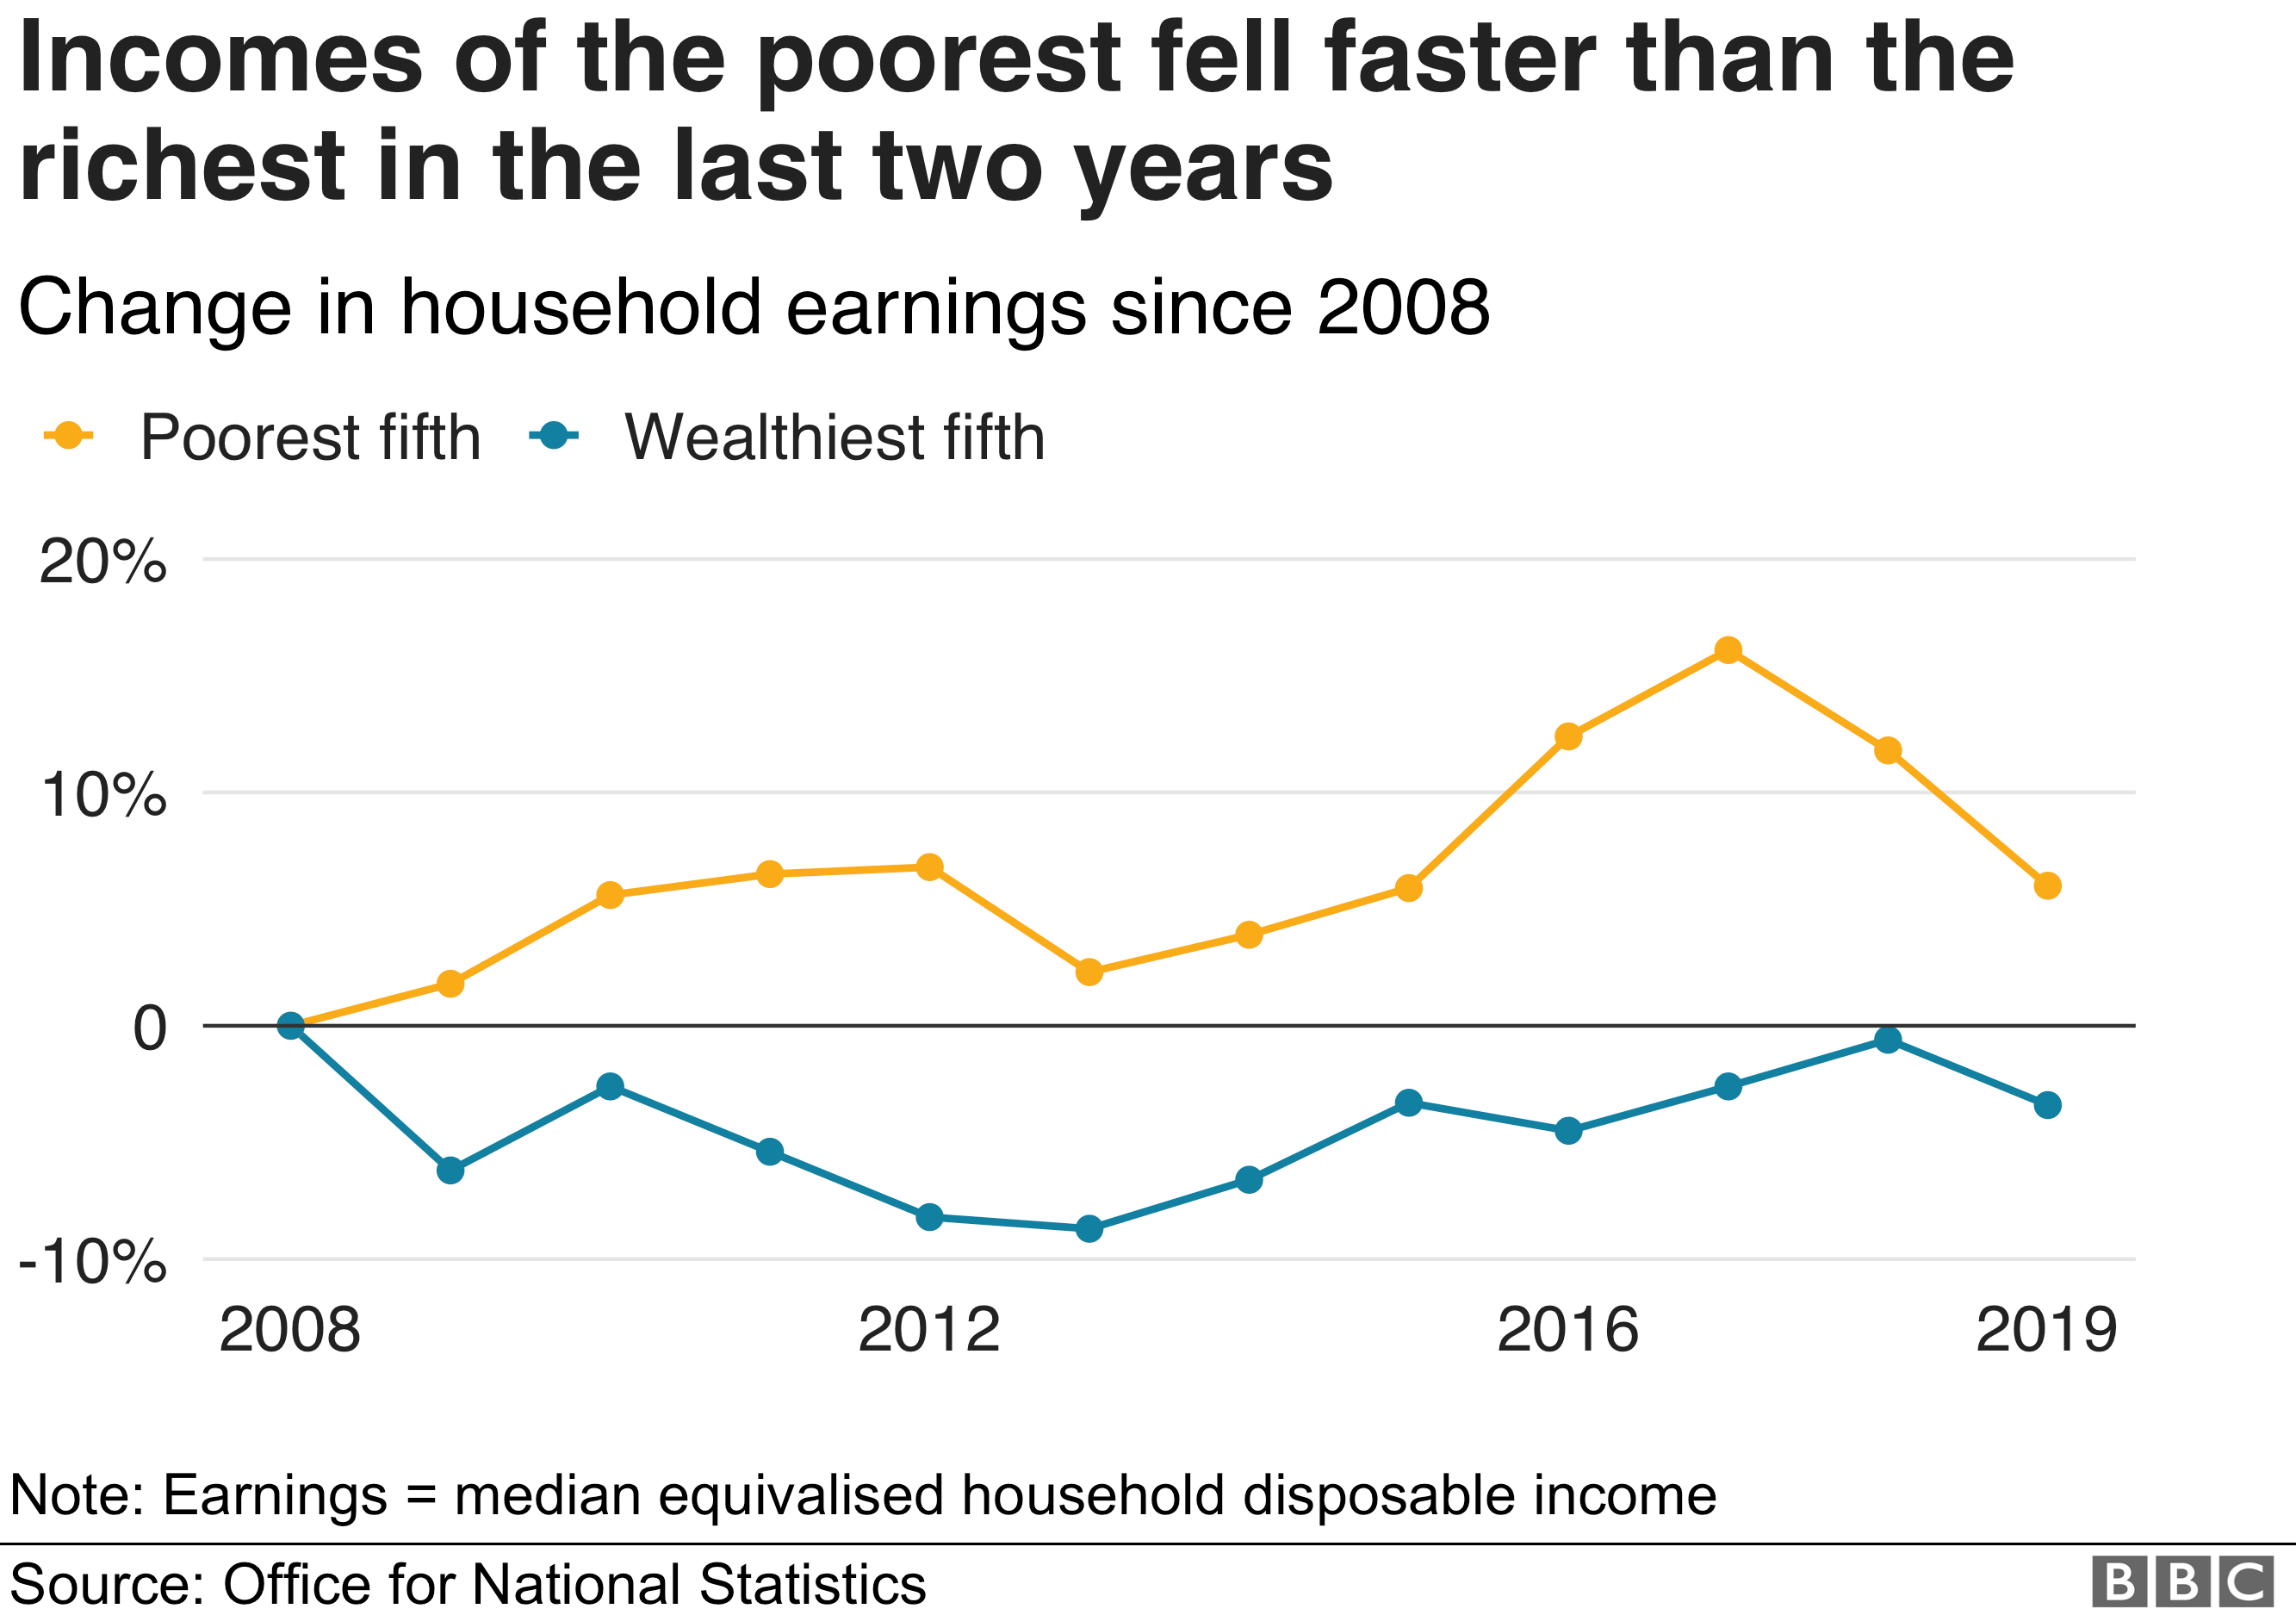 Chart showing income change